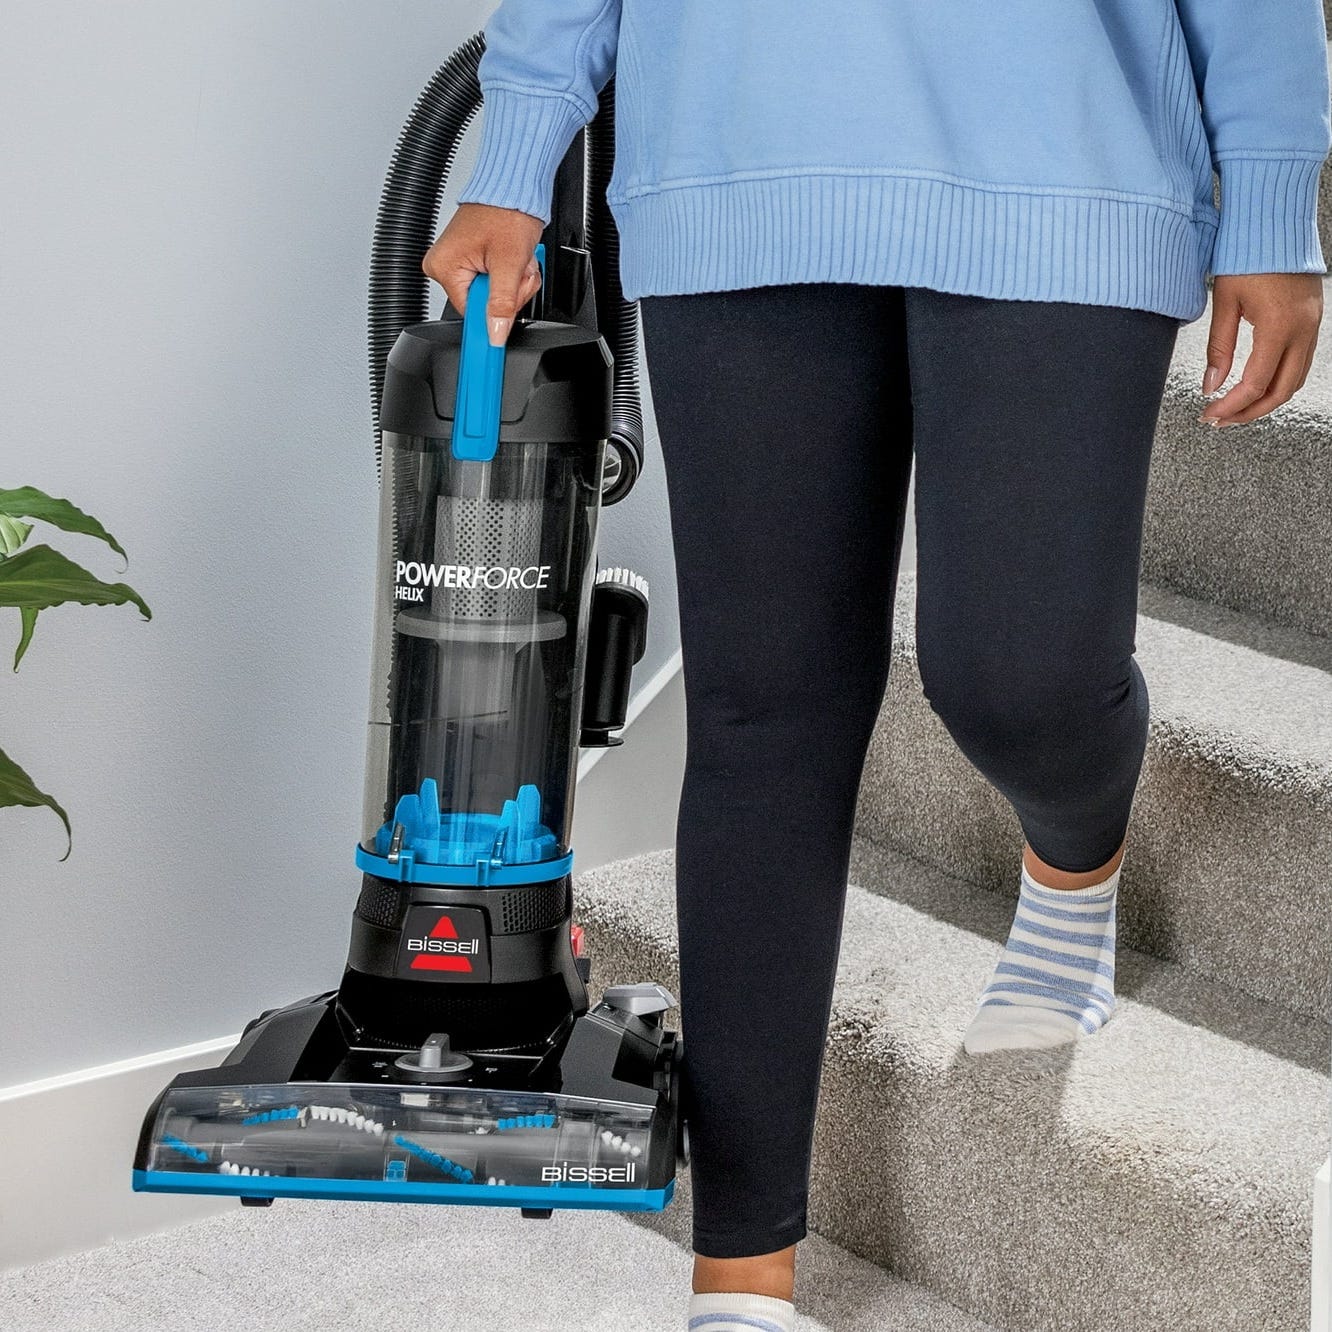 A Bissell PowerForce Helix vacuum cleaner being used on stairs.